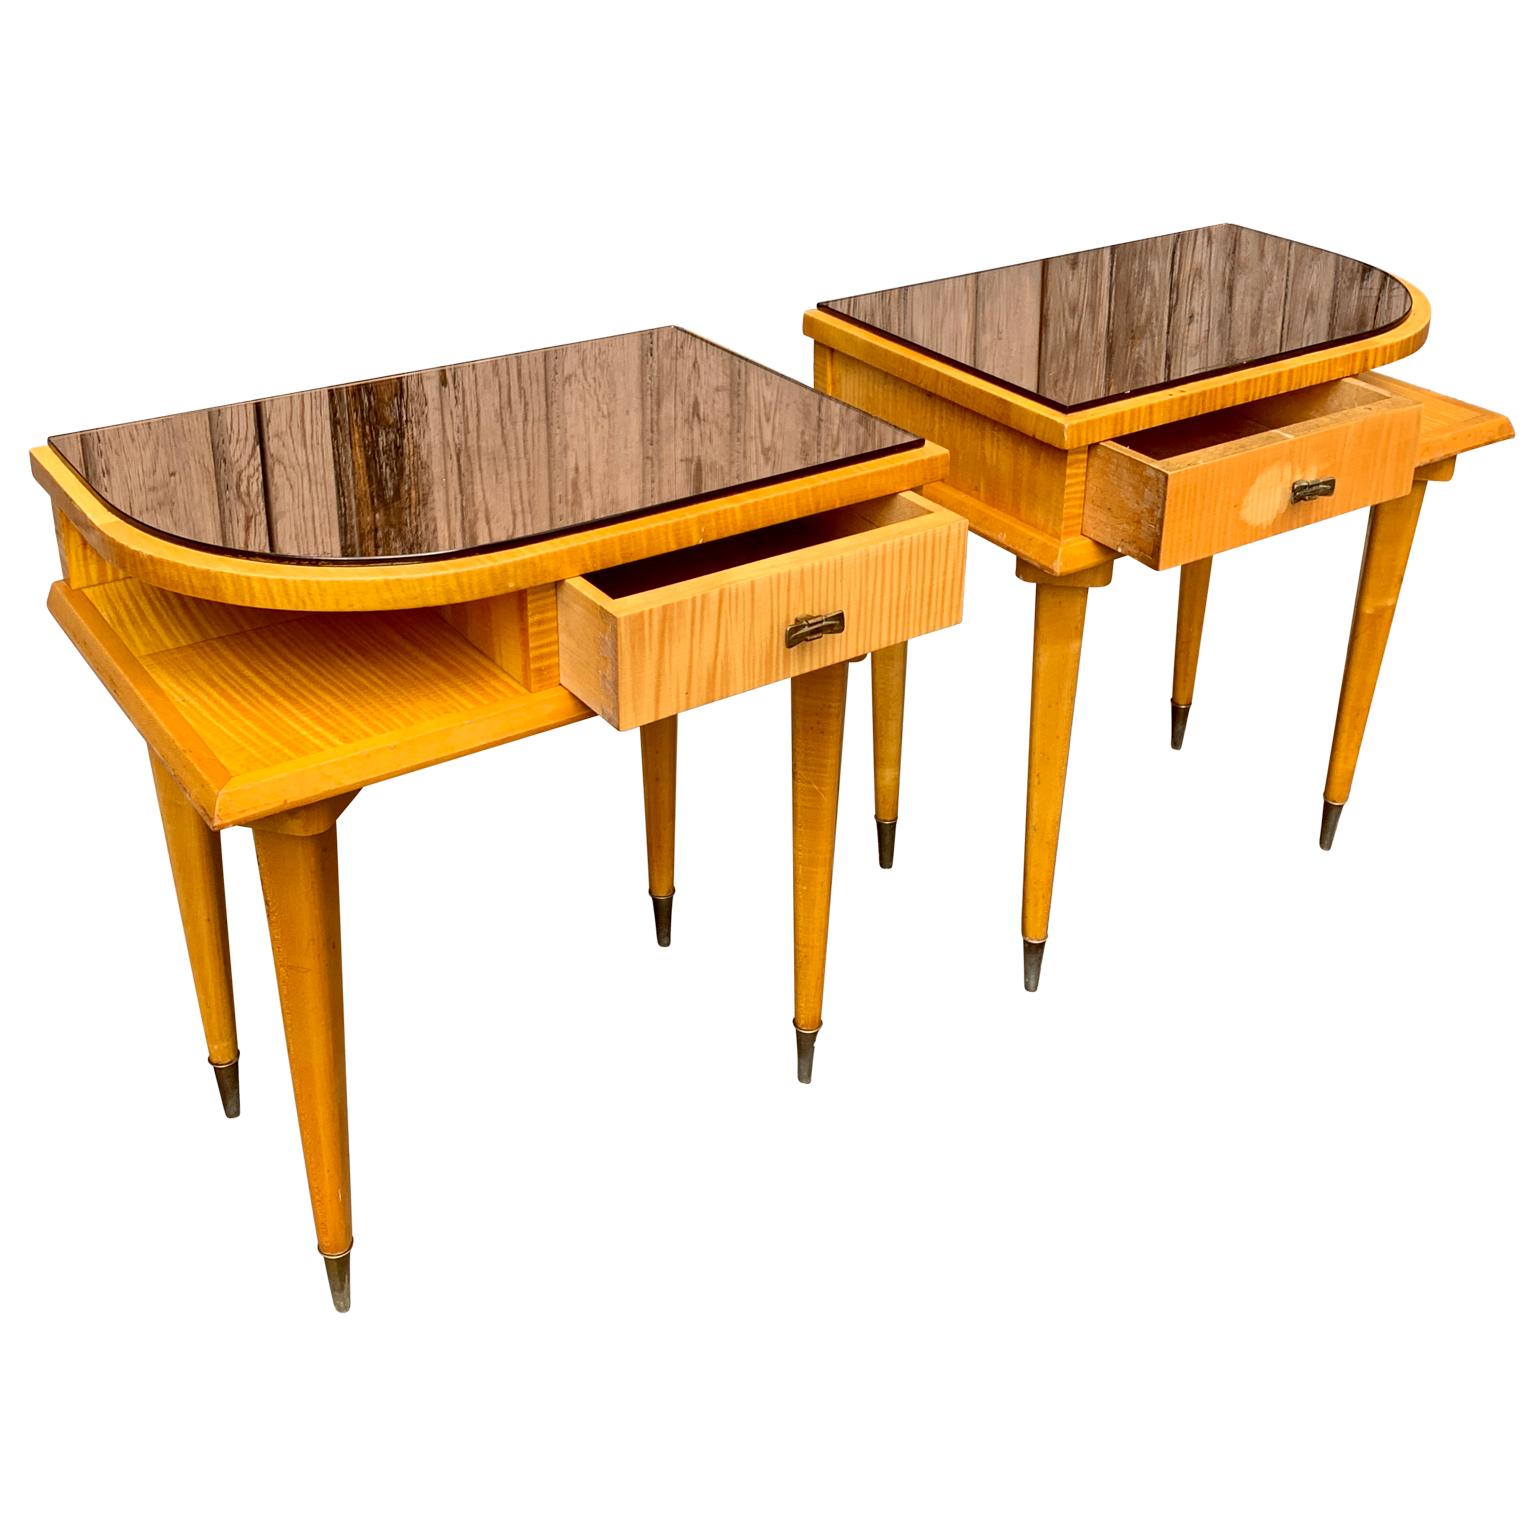 Mid-20th Century Pair of Mid-Century French Nightstands In Birch Wood For Sale